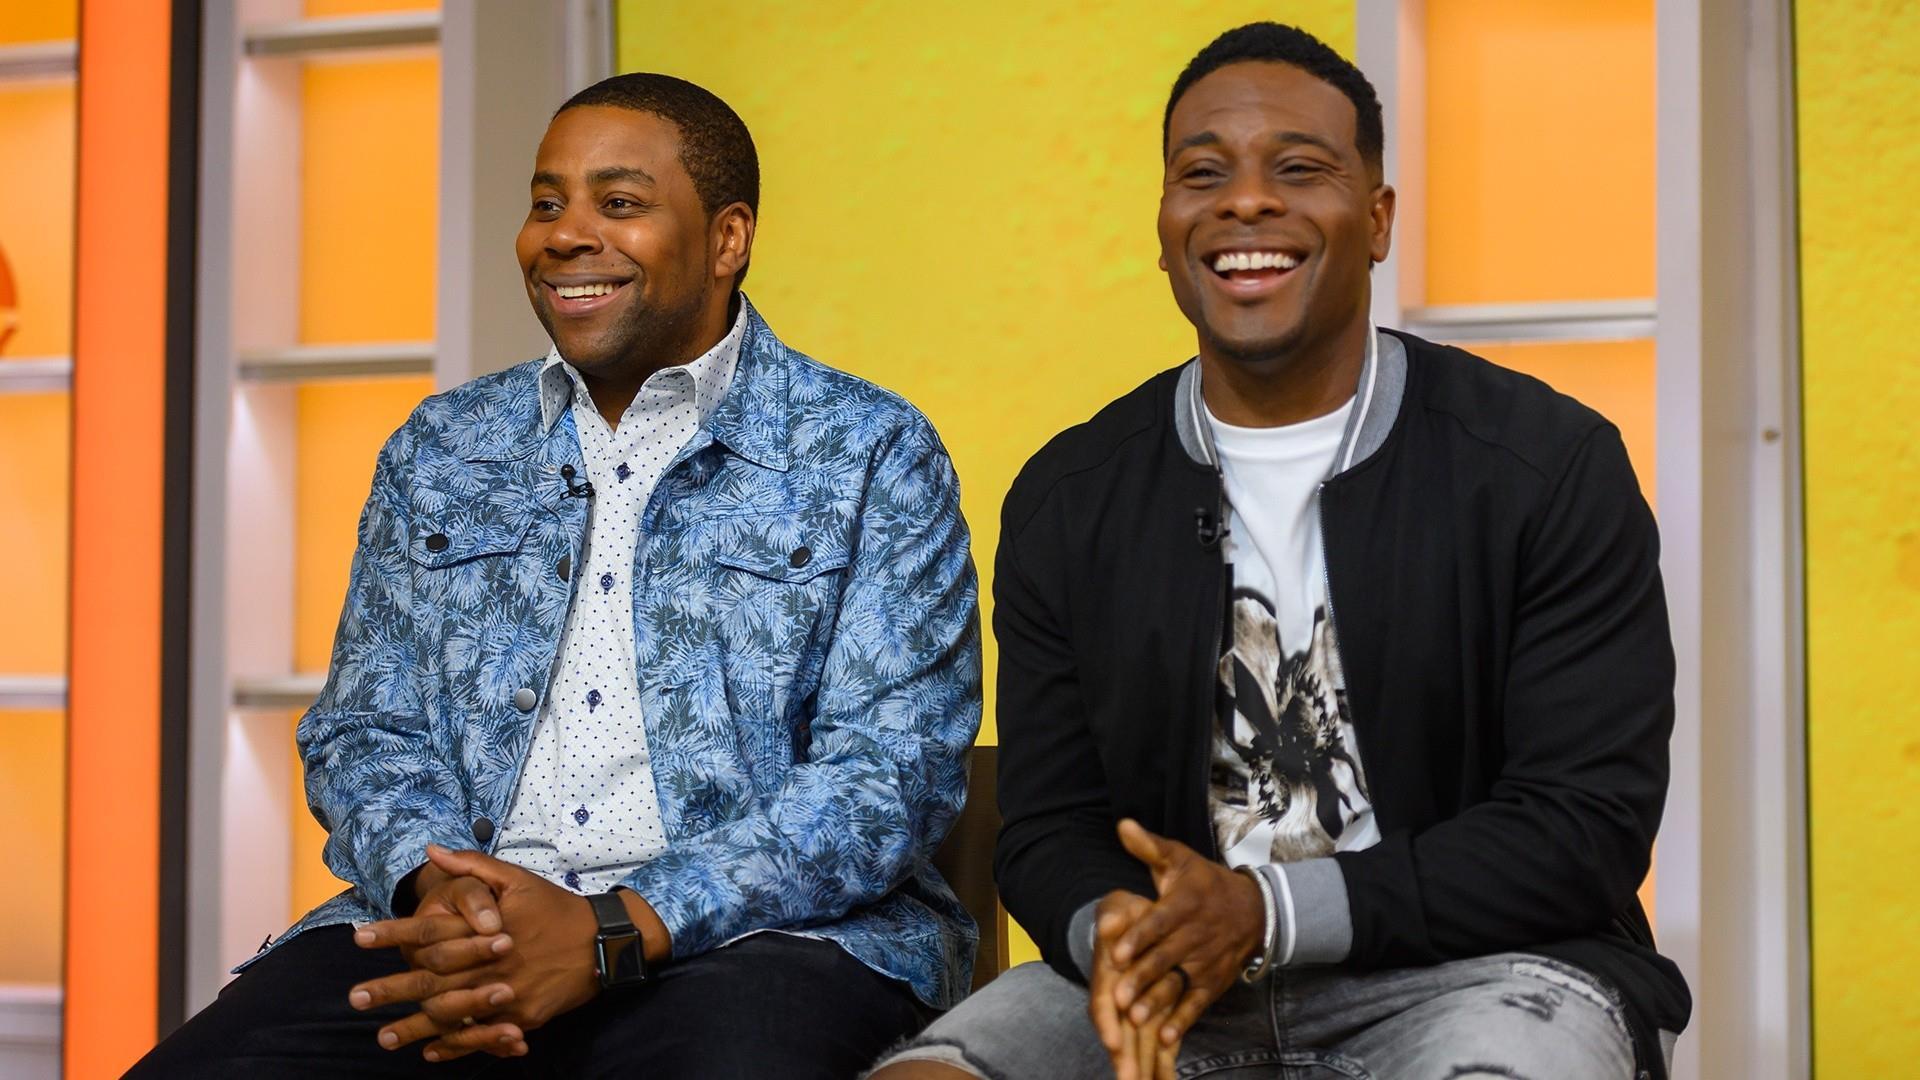 Kenan Thompson and Kel Mitchell talk about ‘All That’ reboot